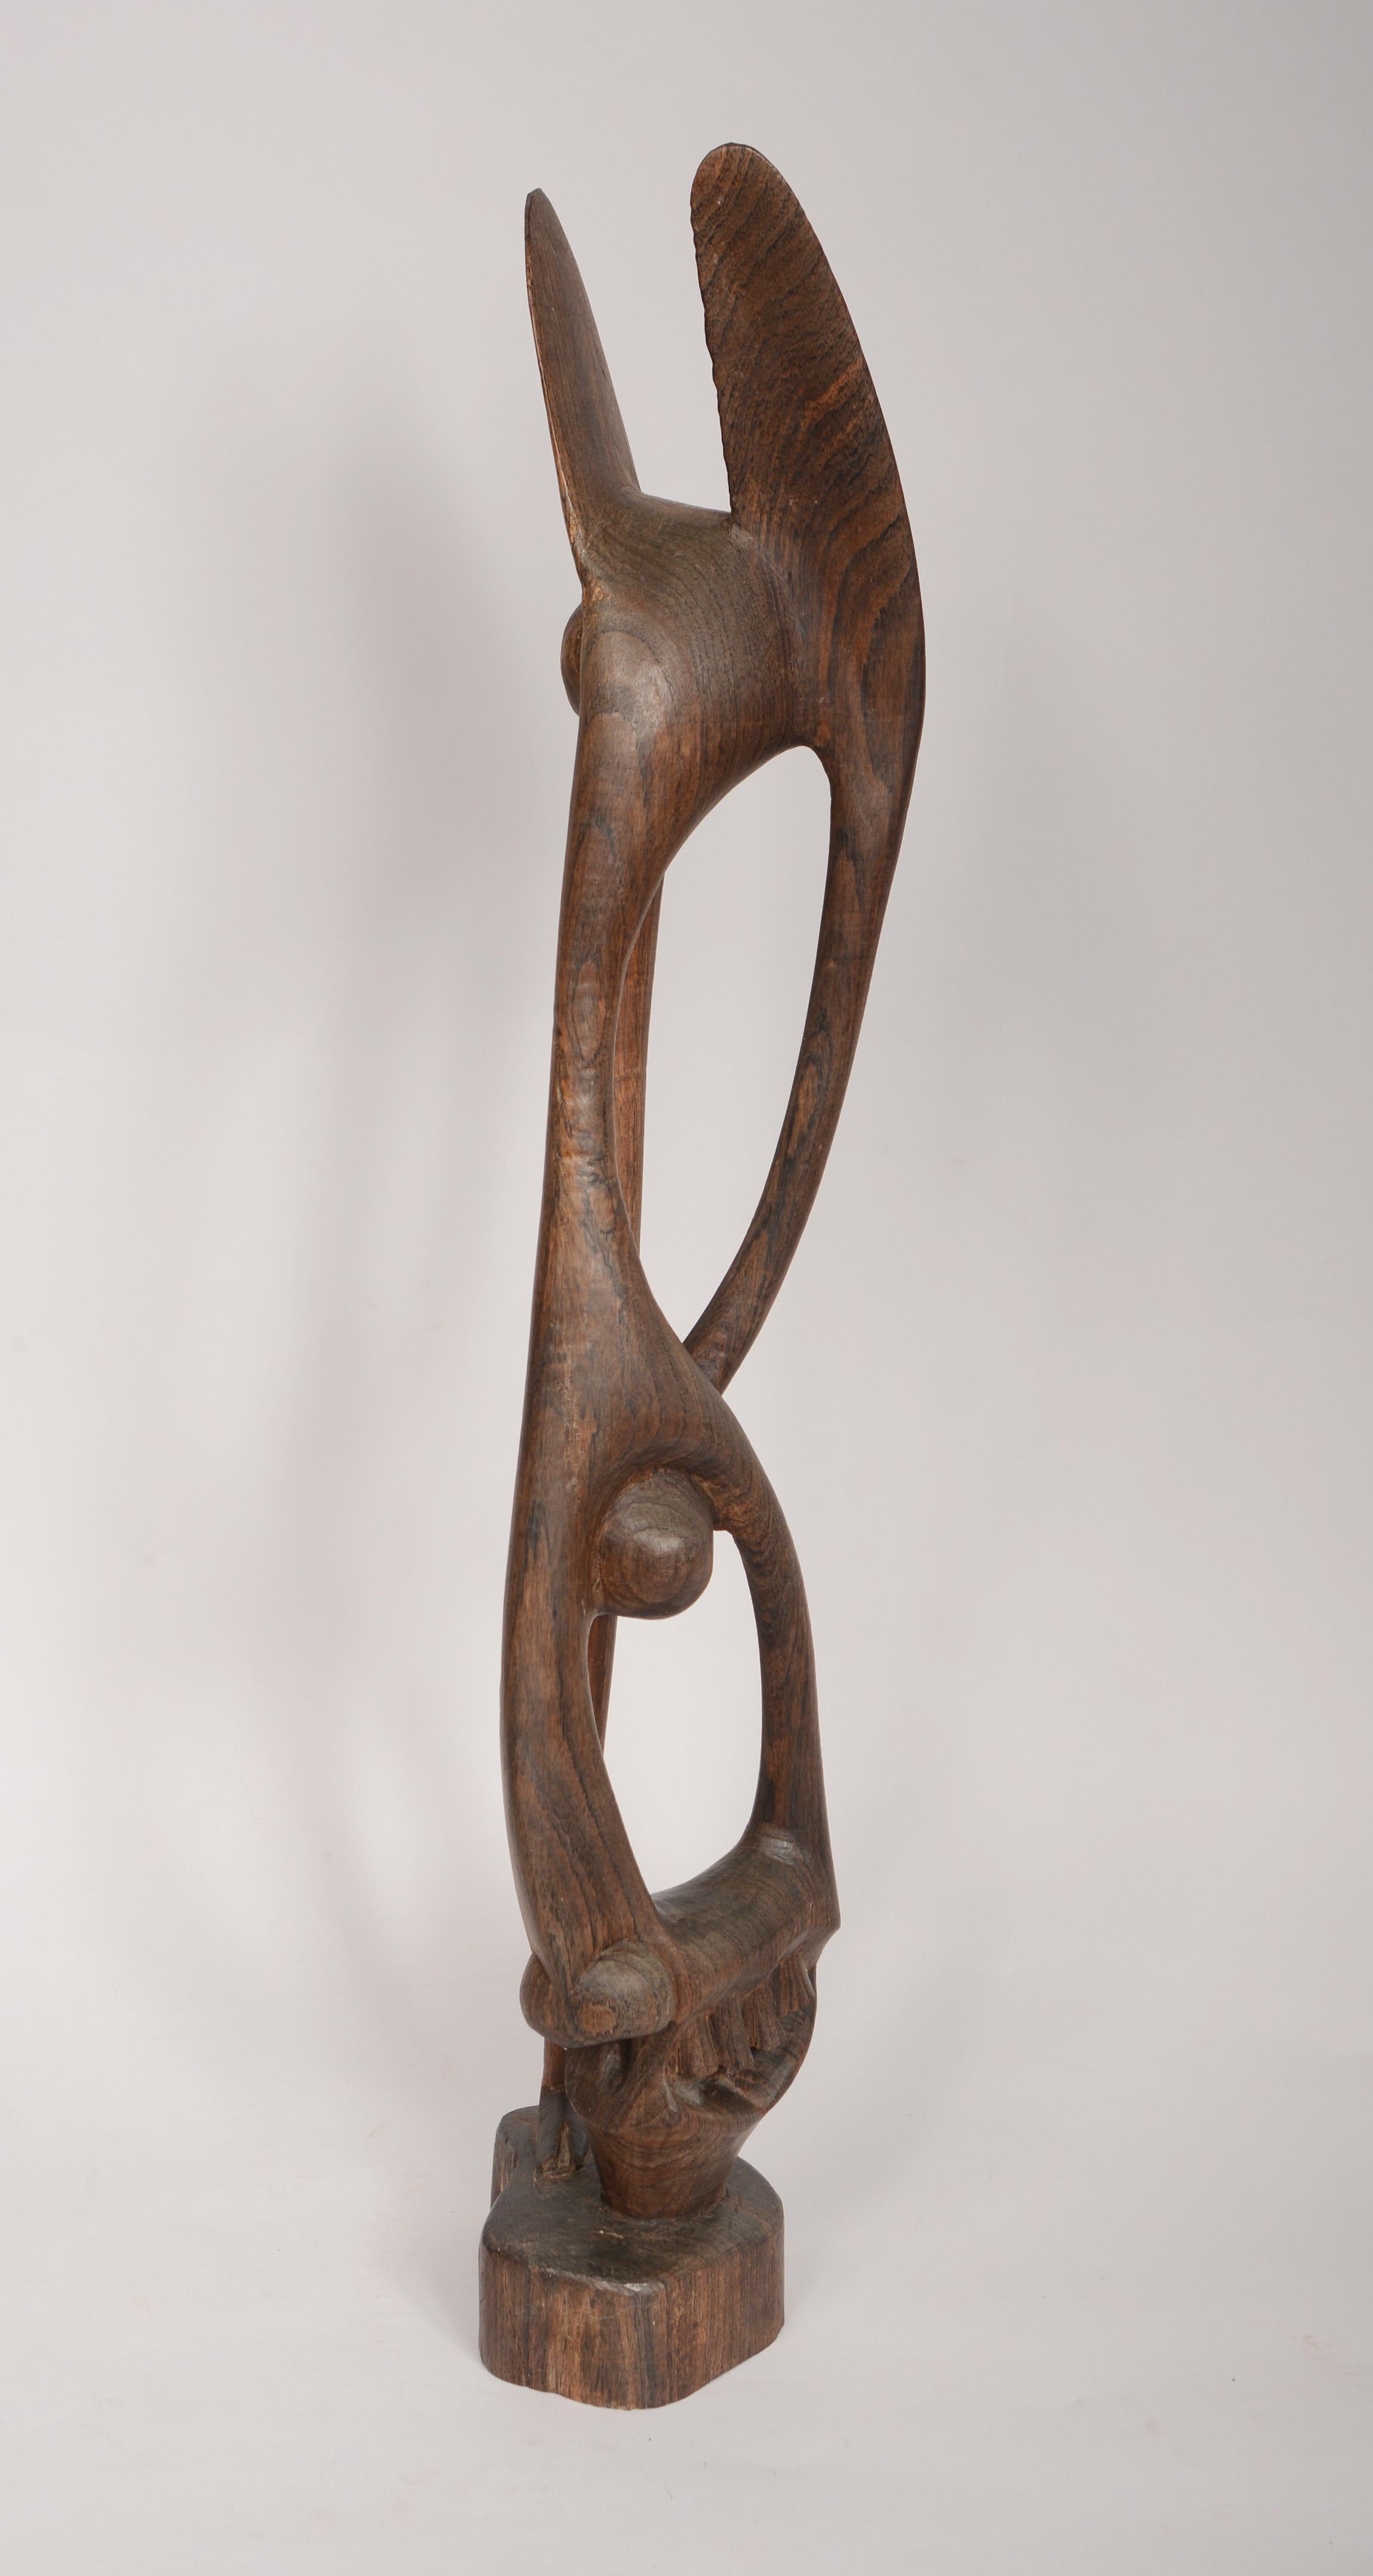 Carved hardwood Shetani sculpture by a member of the Makonde people of East Africa. These abstract sculptures came out of the influence of European and Western culture beginning in the 1930's. This sculpture is signed. This was collected in East